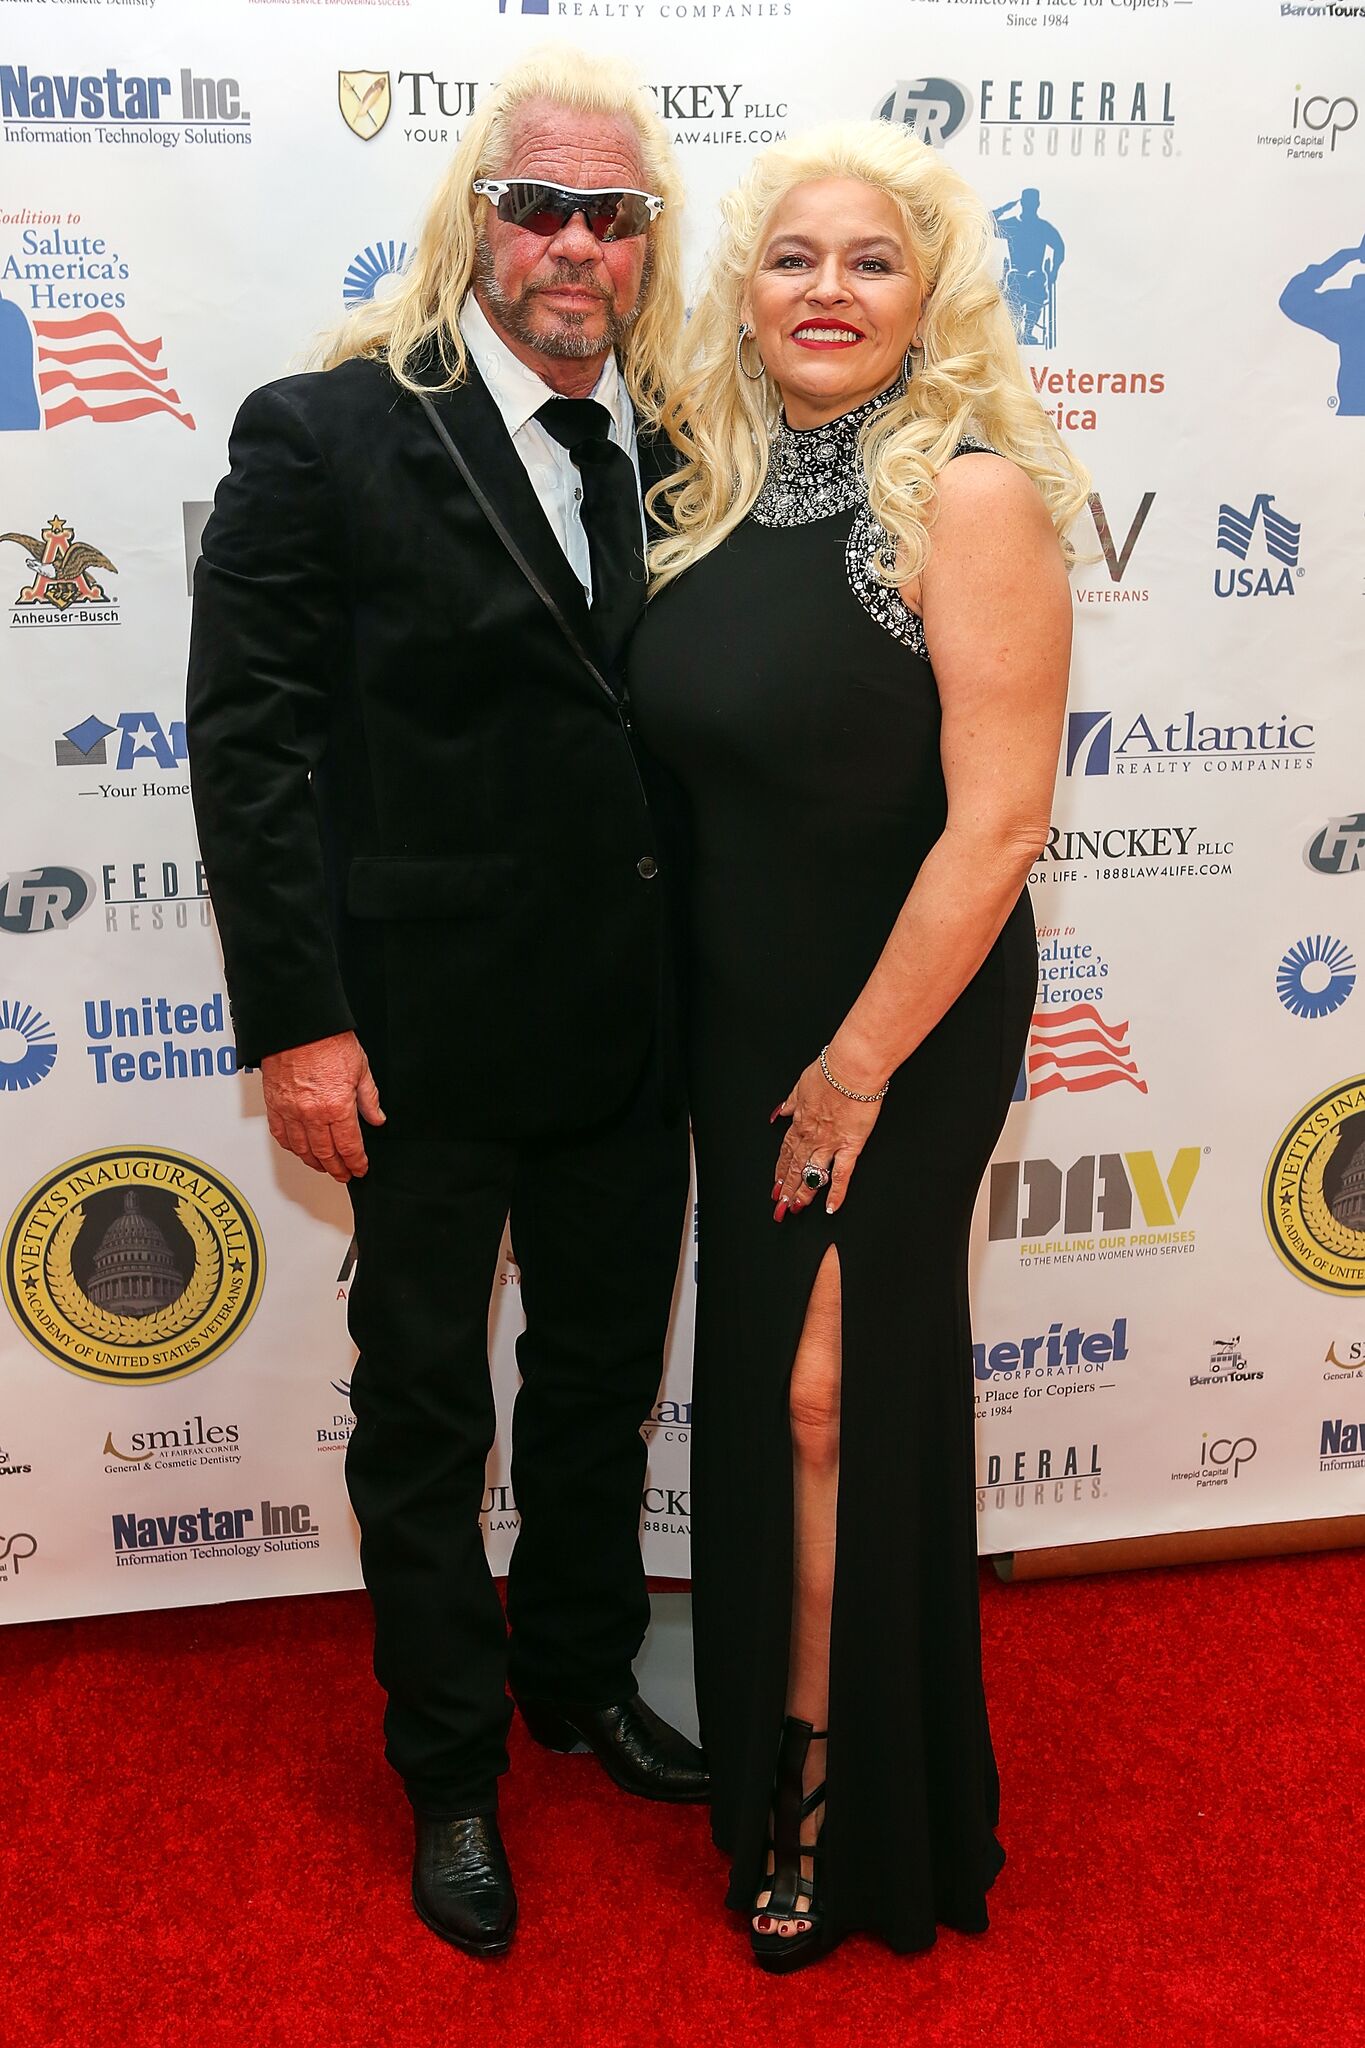 Duane 'Dog the Bounty Hunter" Chapman (L) and Beth Chapman attend the Vettys Presidential Inaugural Ball| Getty Images